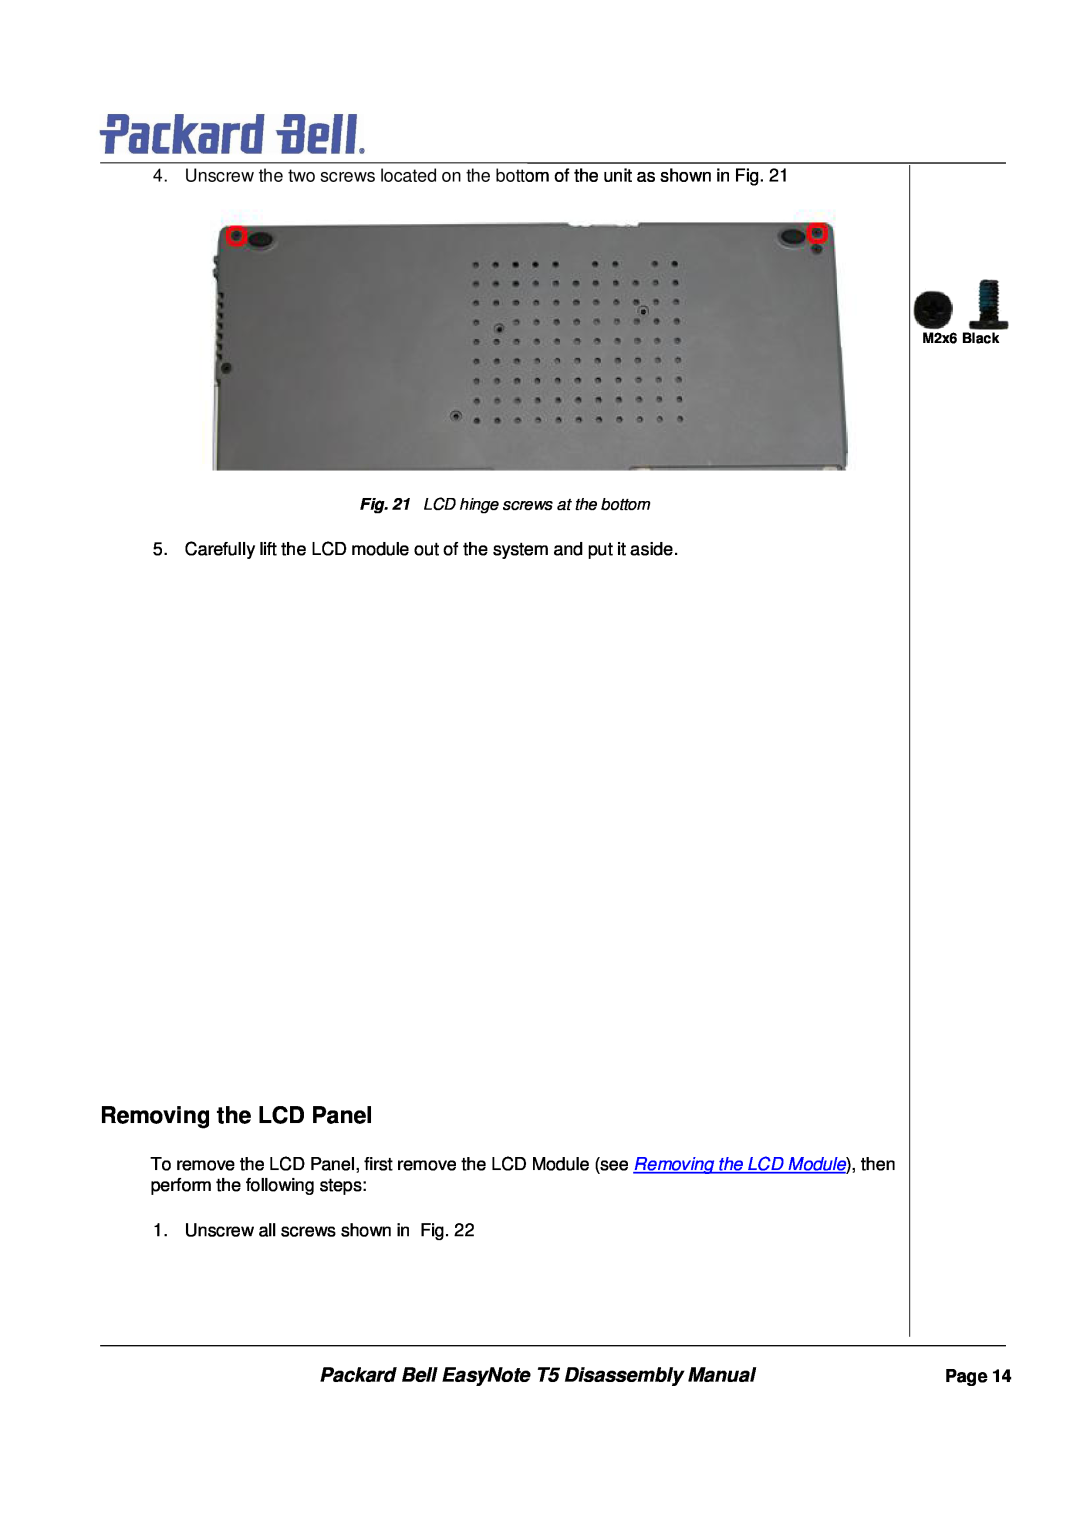 Packard Bell manual Removing the LCD Panel, Packard Bell EasyNote T5 Disassembly Manual 